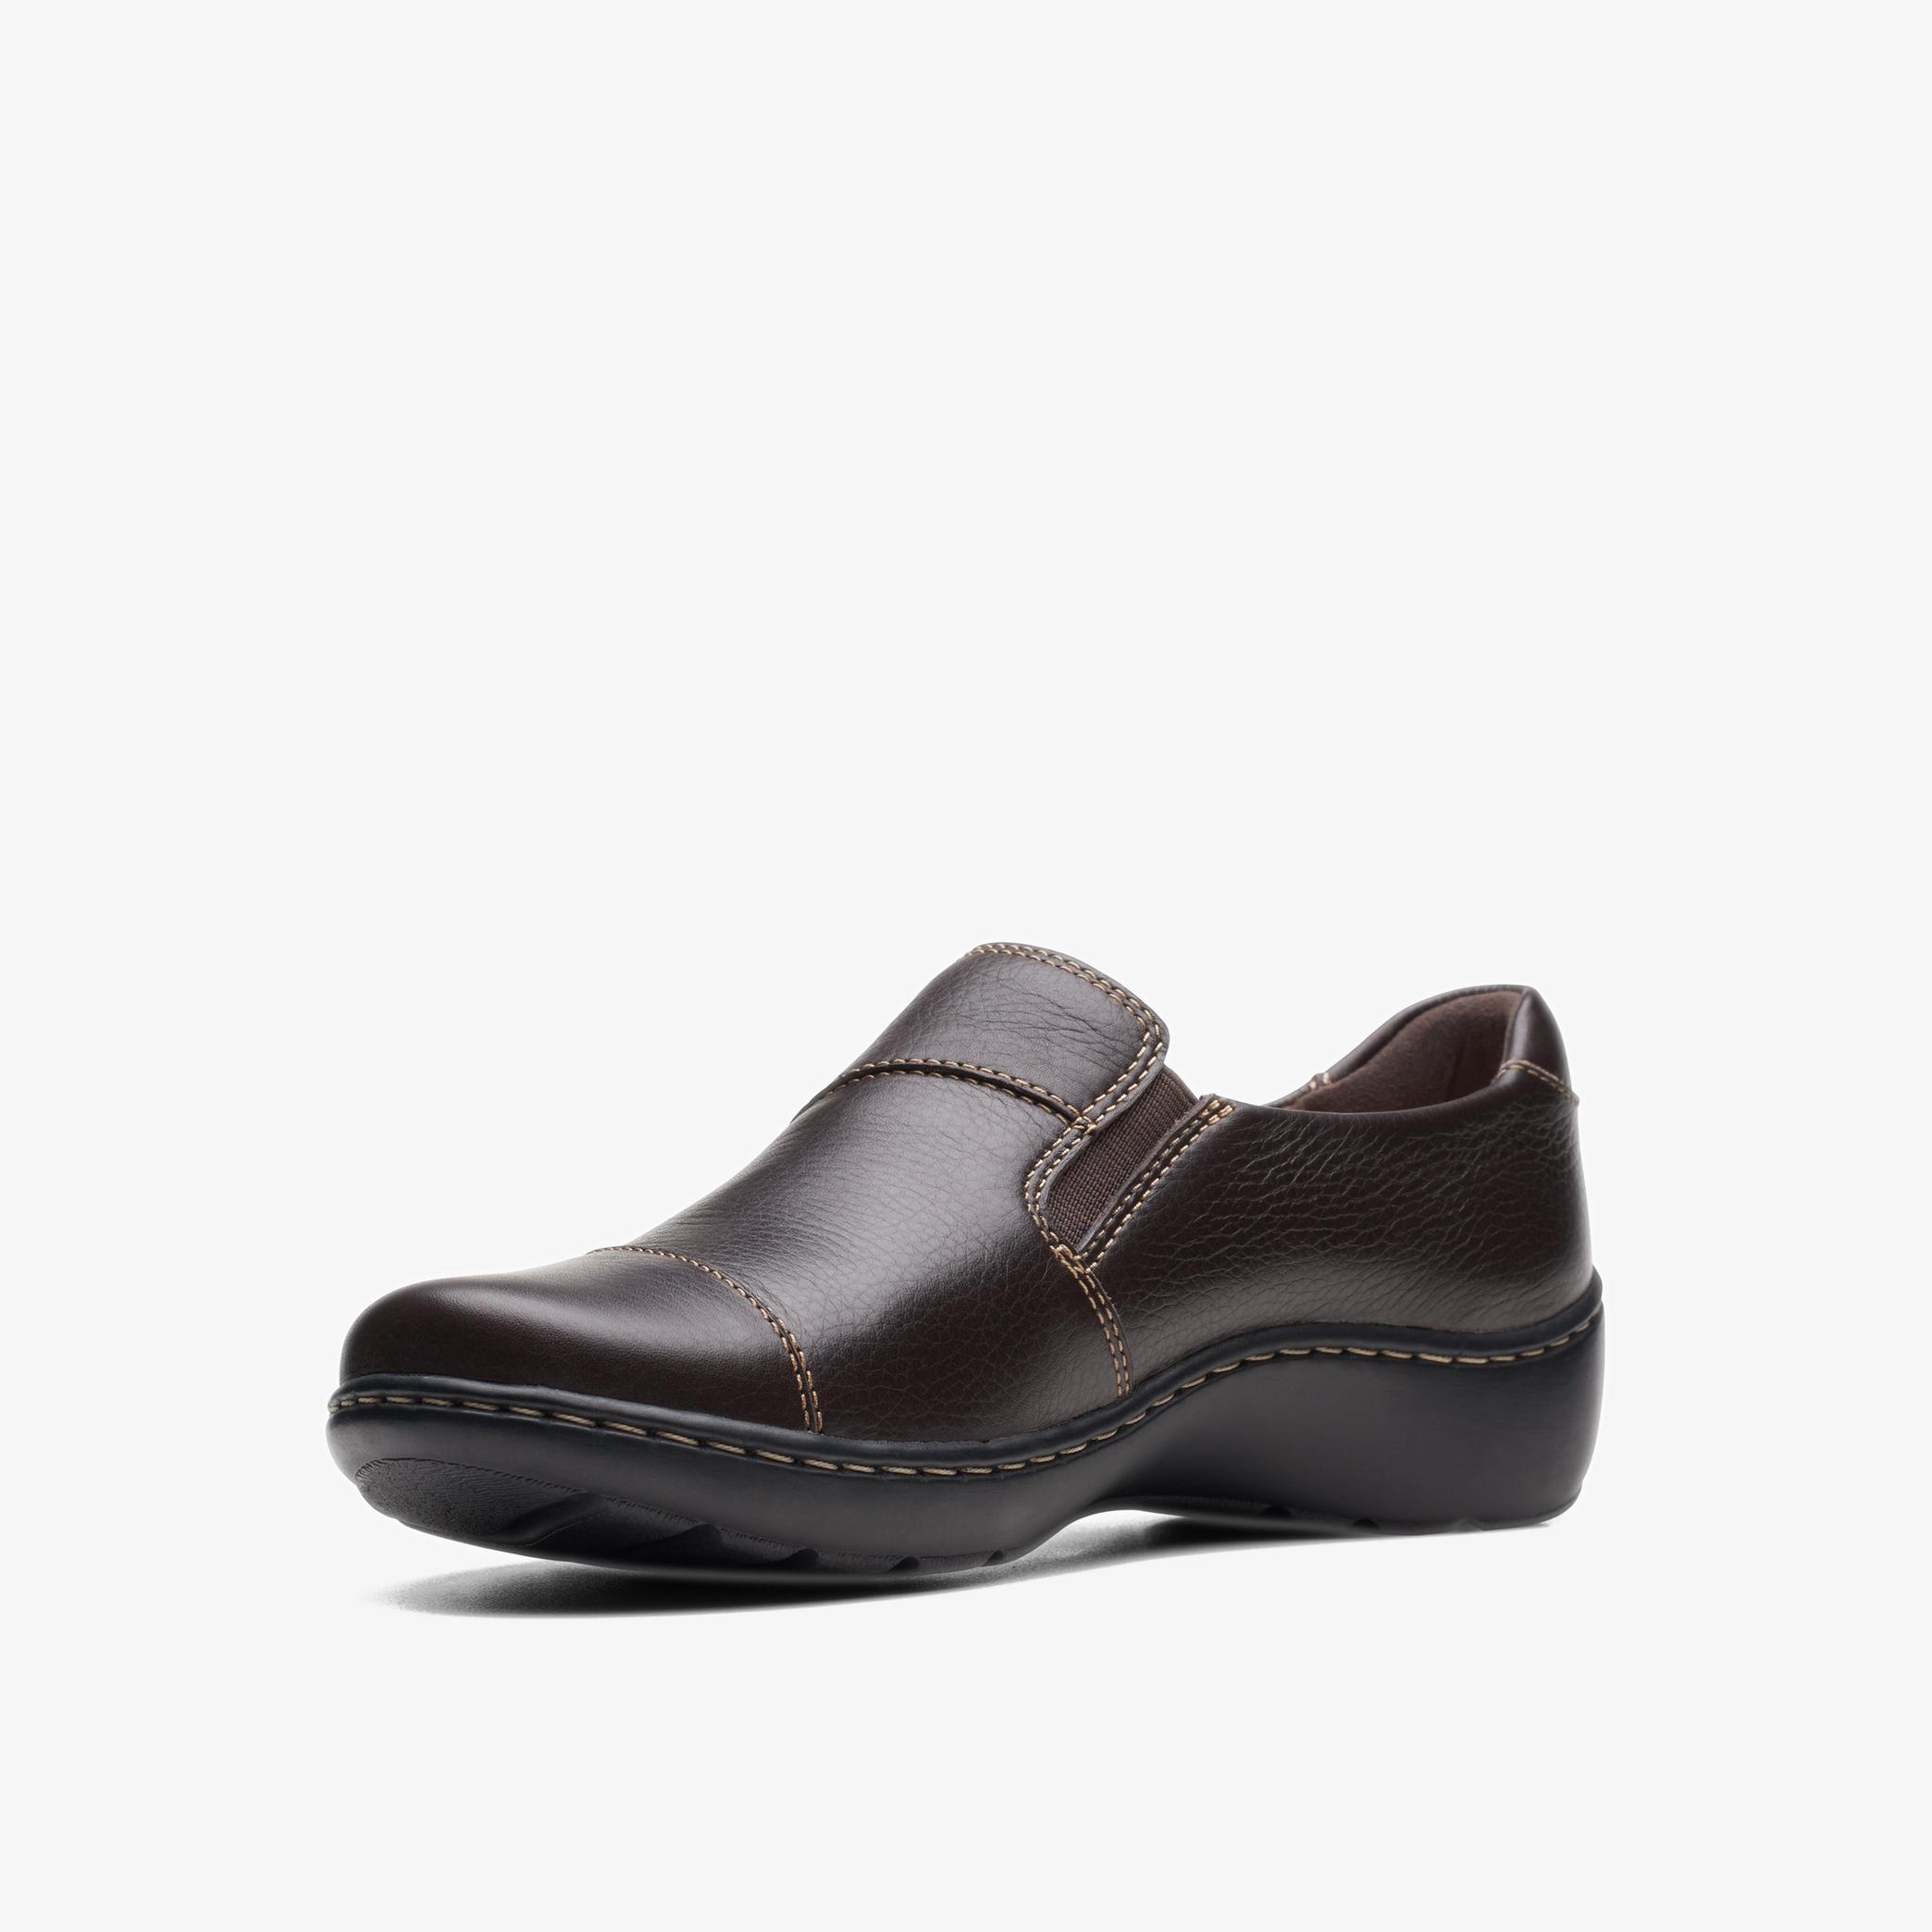 Cora Harbor Dark Brown Leather Shoes, view 4 of 6